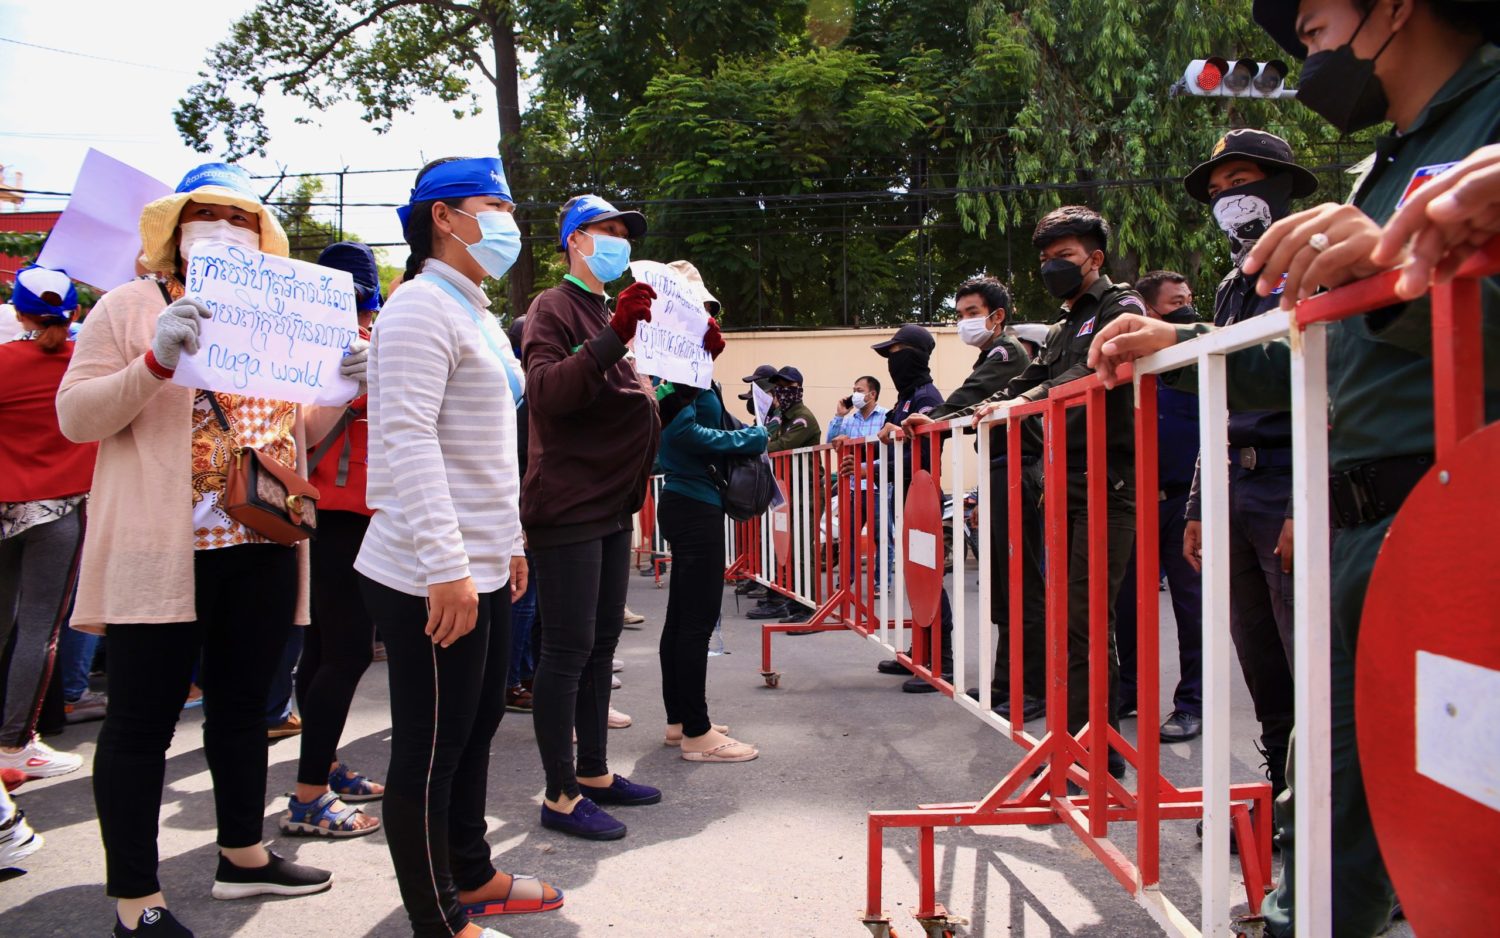 NagaWorld workers are blocked by police barricades at Sothearos Boulevard in Phnom Penh on June 28, 2022. (Hean Rangsey/VOD)